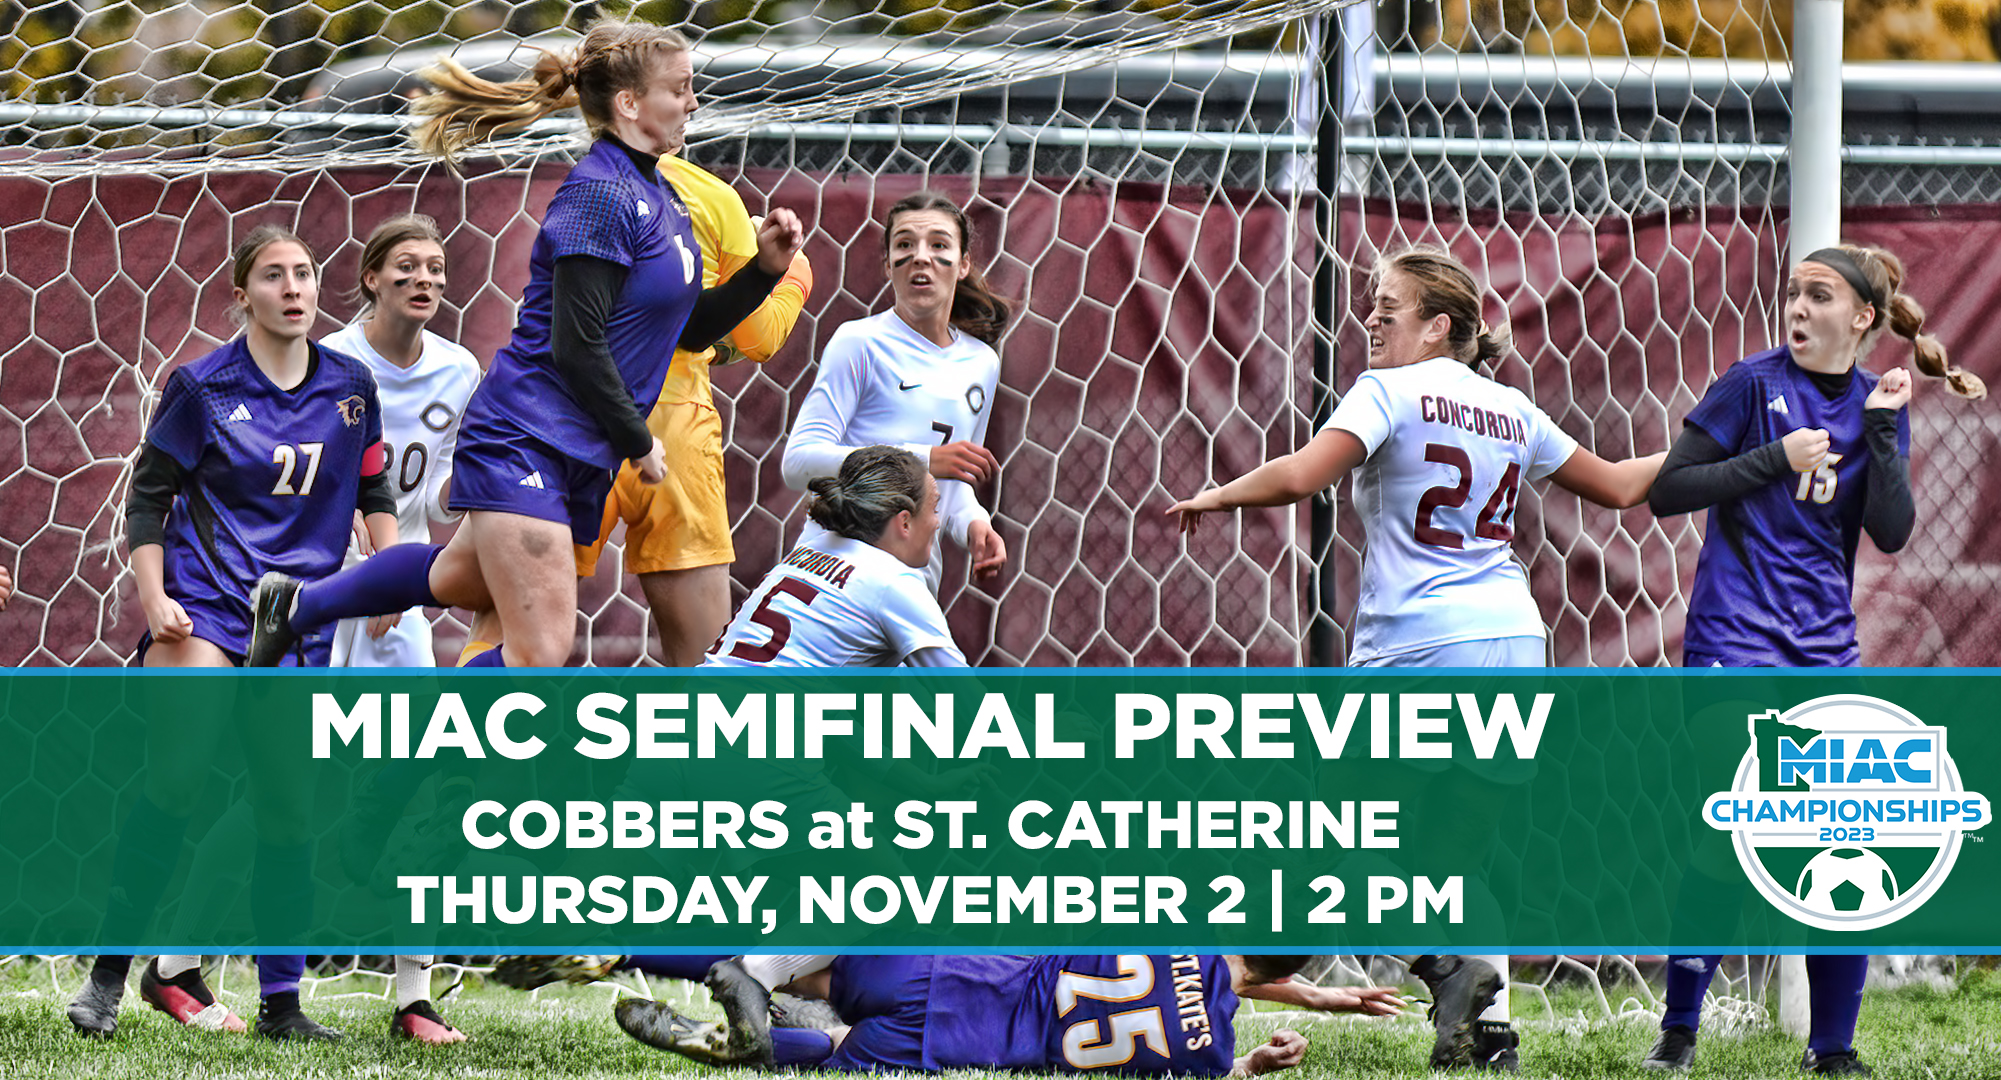 Concordia faces St. Catherine in the semifinals of the MIAC playoffs. The two teams battled to a 1-1 tie in their regular-season match-up in Moorhead.